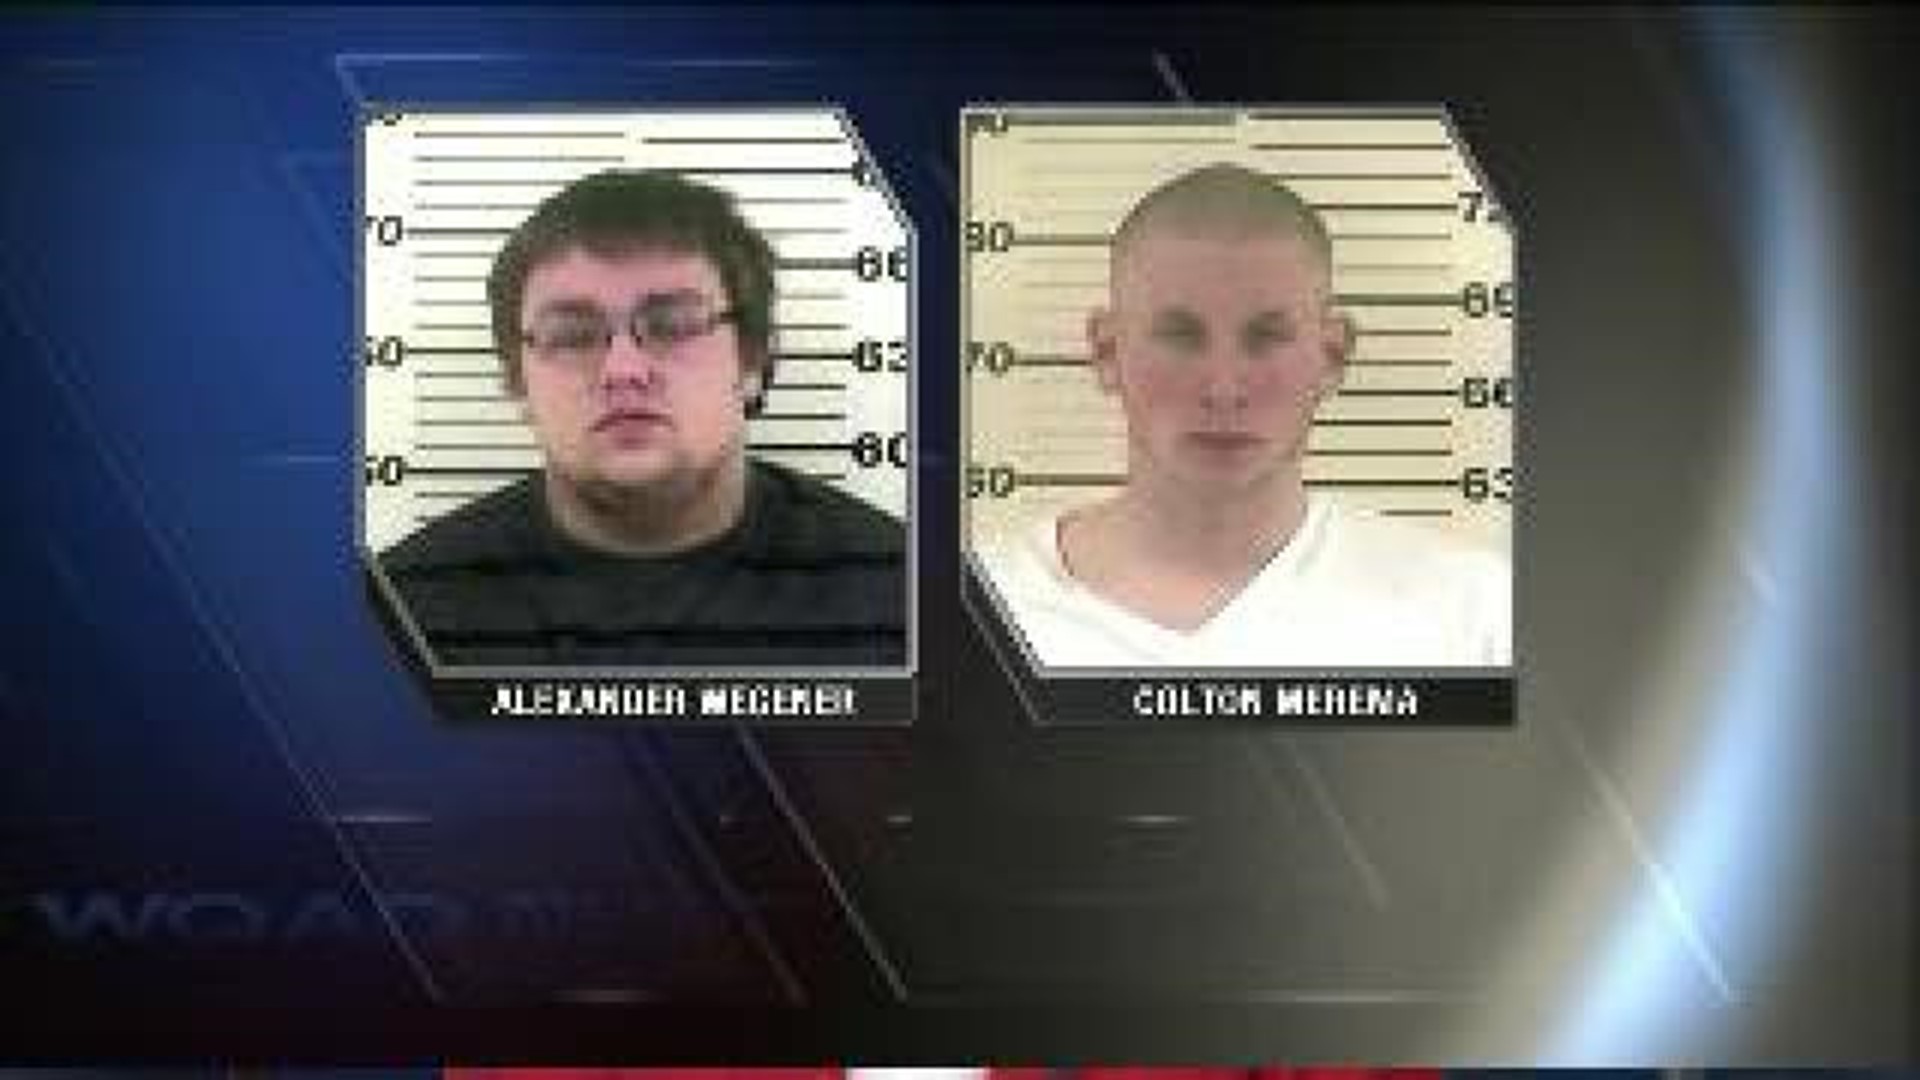 Teens arrested on burglary charges